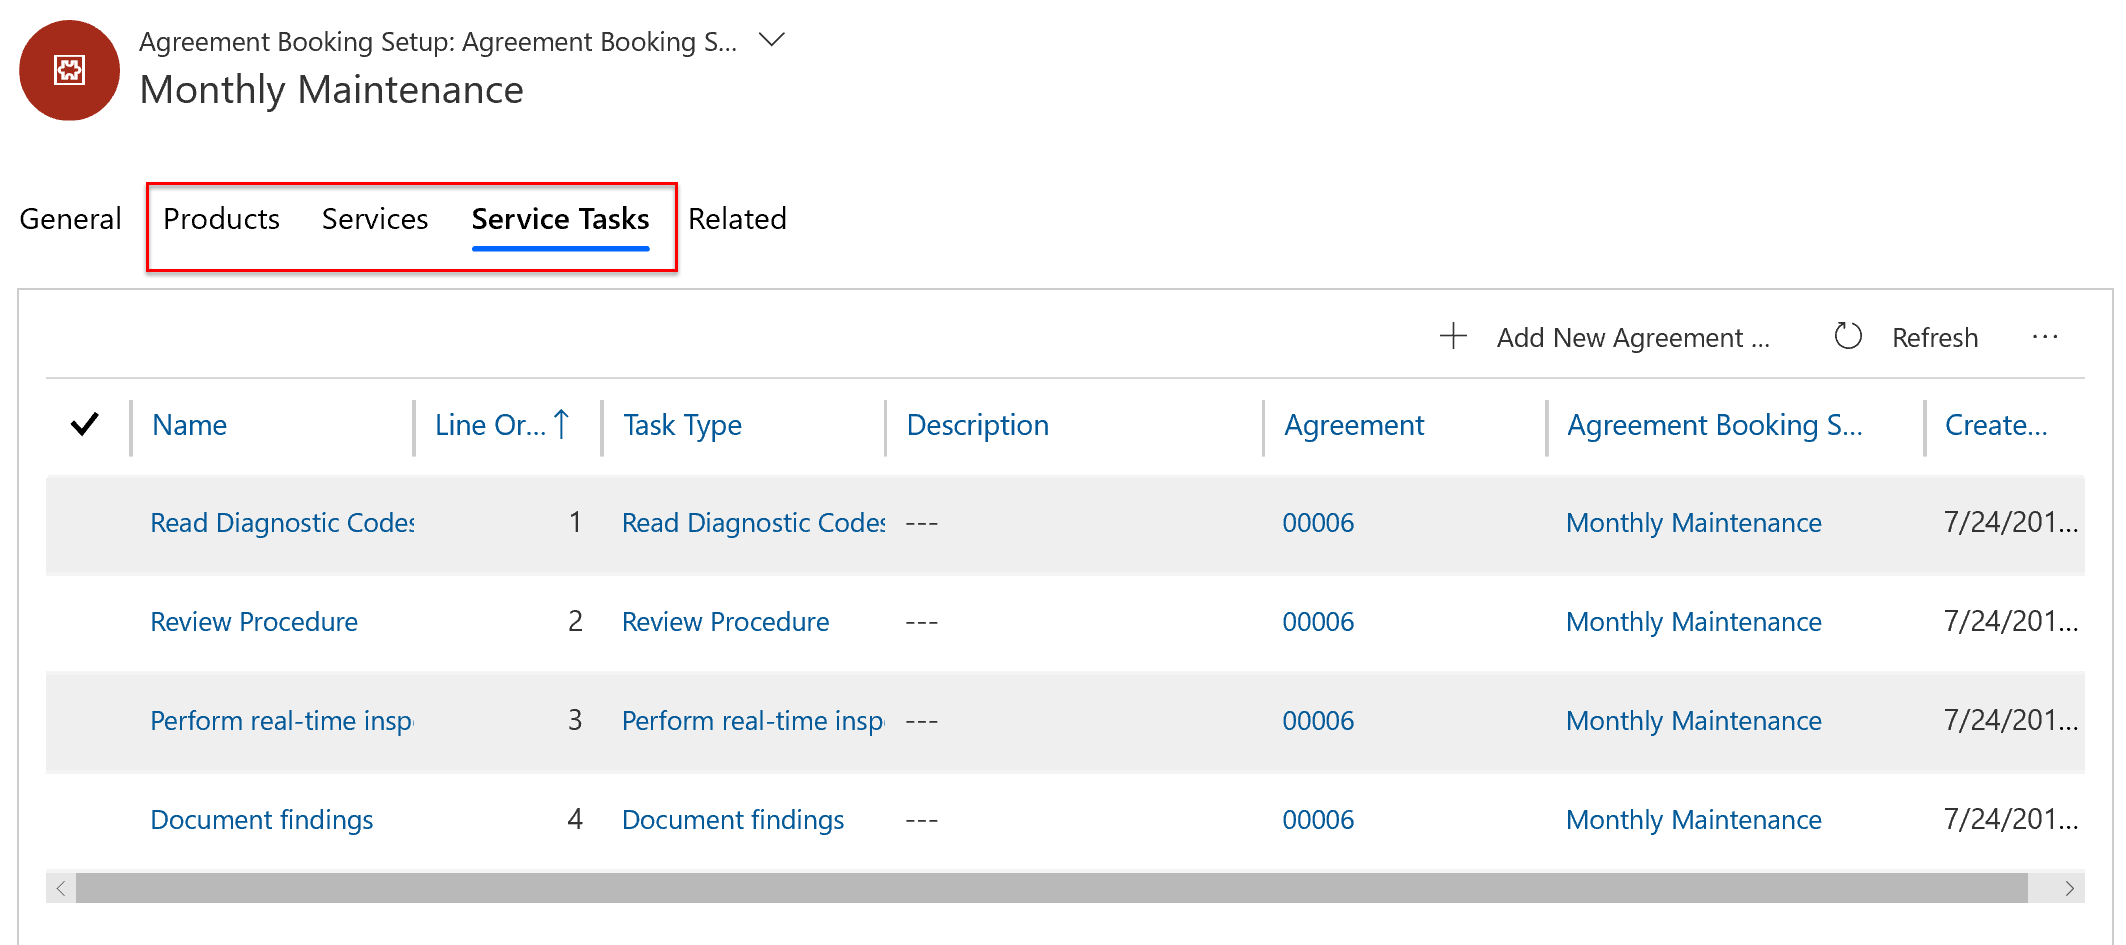 Screenshot of the agreement booking setup, with focus on the products, services, and service tasks tabs.